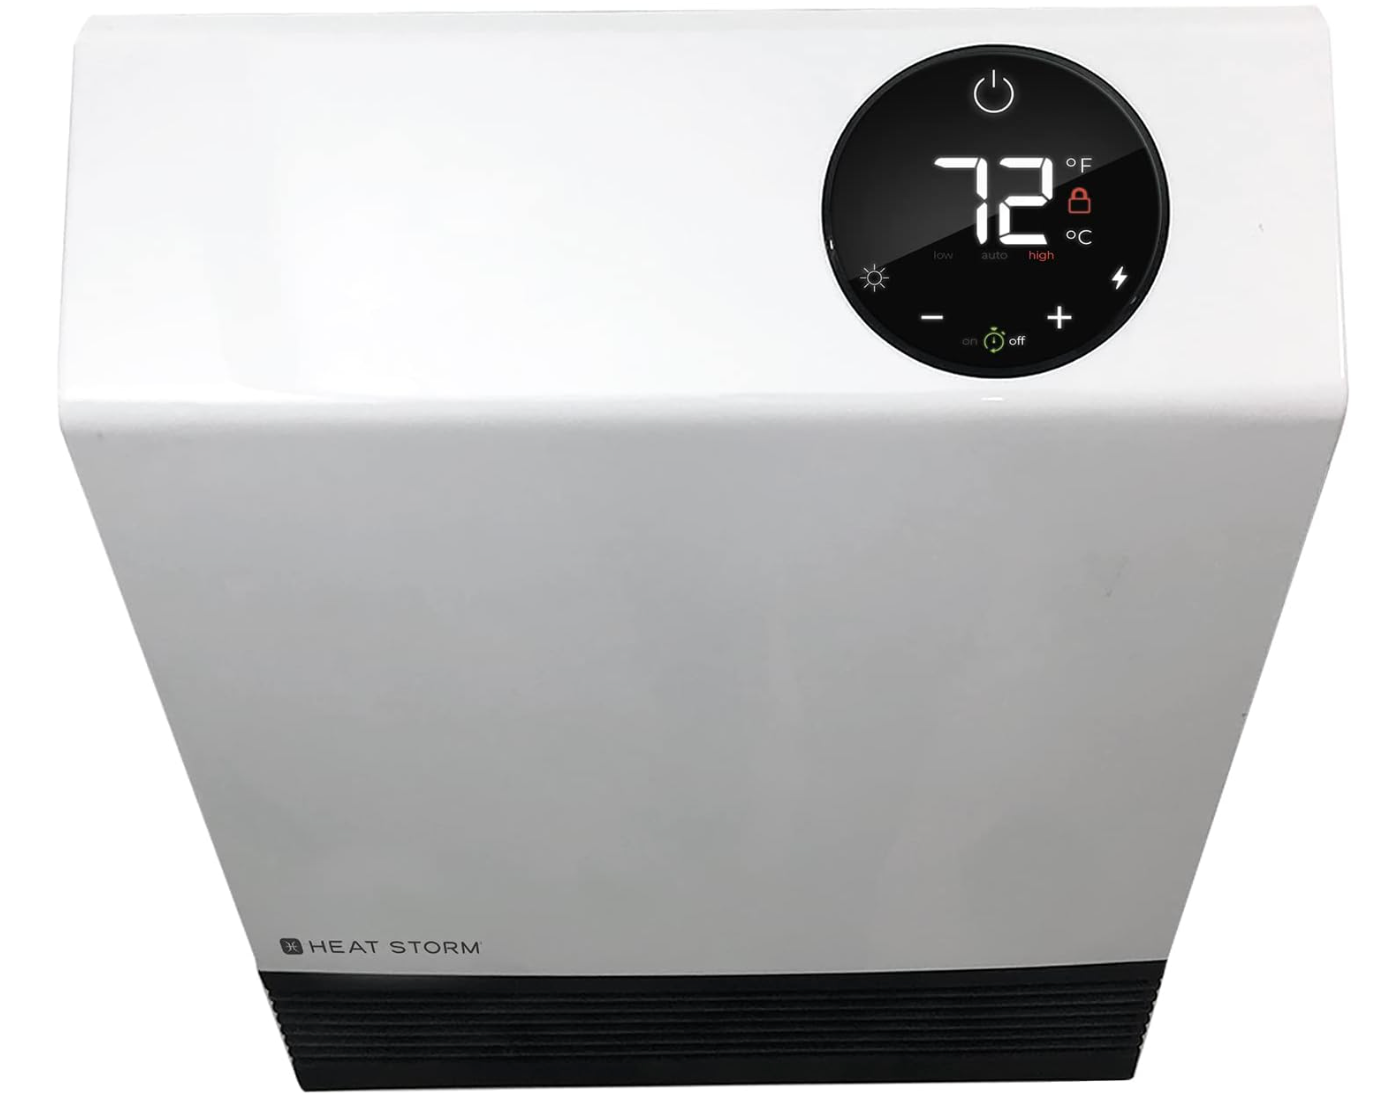 HEAT STORM HS-1000-WX Deluxe Wall Heater, White